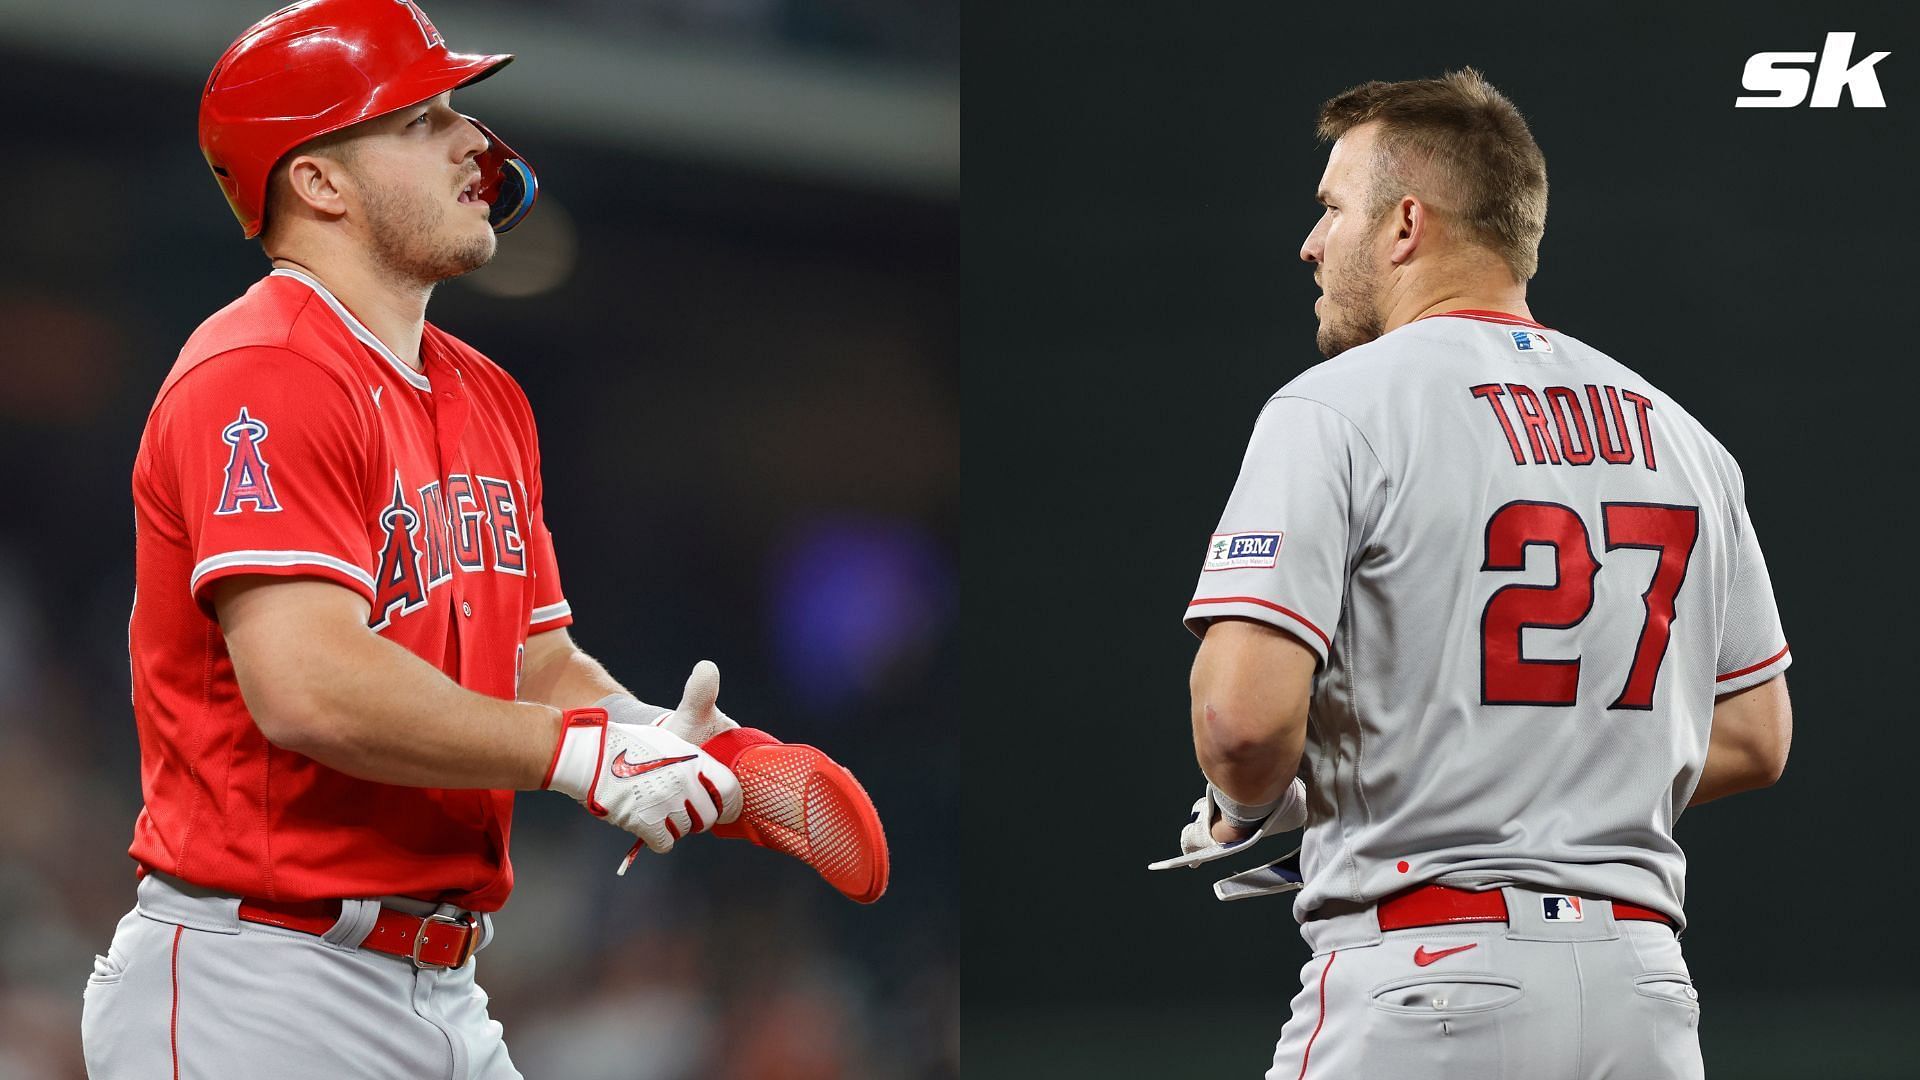 Fans have had their say about Mike Trout